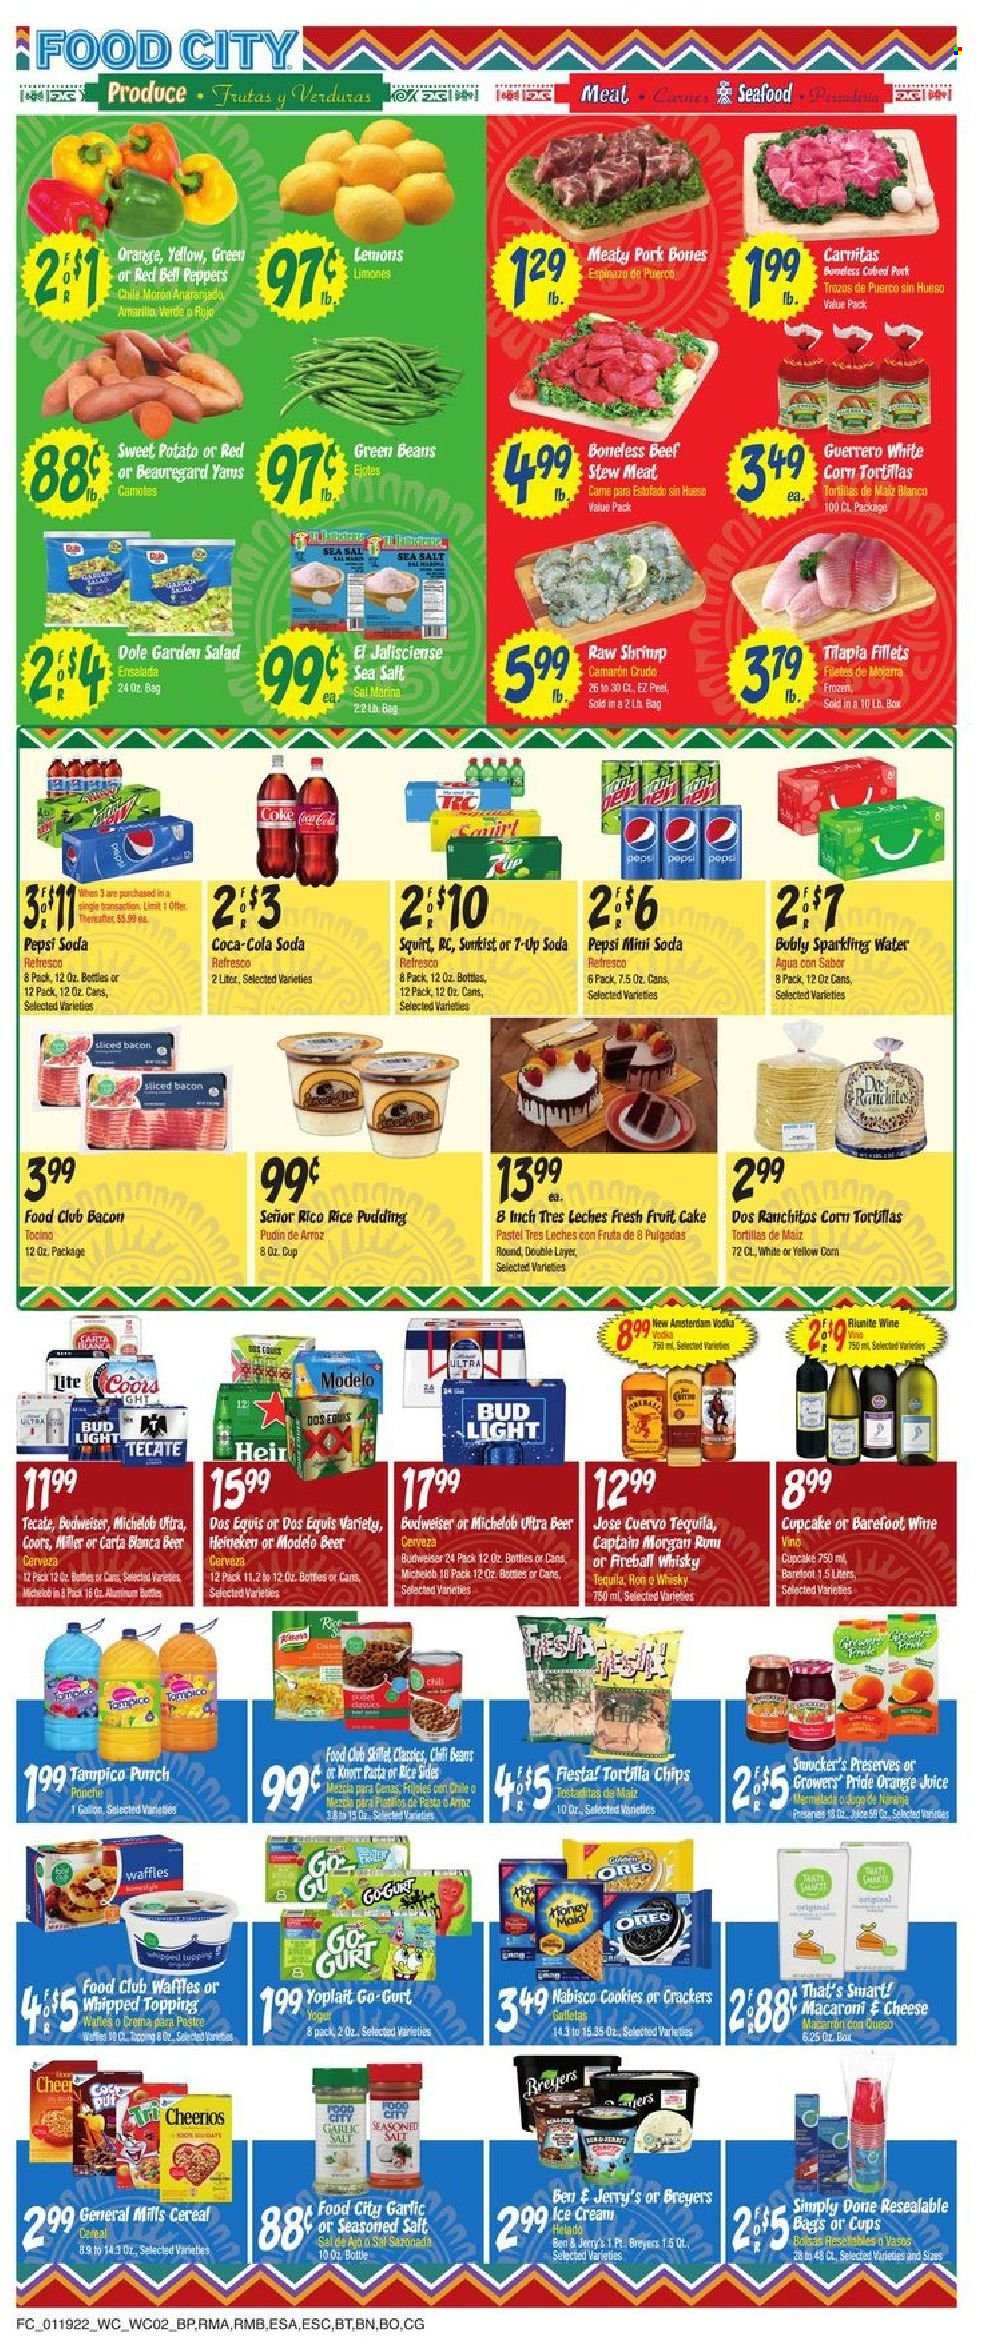 thumbnail - Food City Flyer - 01/19/2022 - 01/25/2022 - Sales products - cake, waffles, beans, bell peppers, garlic, green beans, sweet potato, salad, Dole, peppers, tilapia, seafood, bacon, cheese, Oreo, rice pudding, ice cream, Ben & Jerry's, cookies, crackers, tortilla chips, topping, cereals, Cheerios, Coca-Cola, Pepsi, orange juice, juice, fruit punch, soda, sparkling water, wine, Cupcake Vineyards, Captain Morgan, rum, tequila, vodka, Ron Pelicano, whisky, beer, Bud Light, Heineken, Modelo, Budweiser, Coors, Dos Equis, Michelob. Page 2.